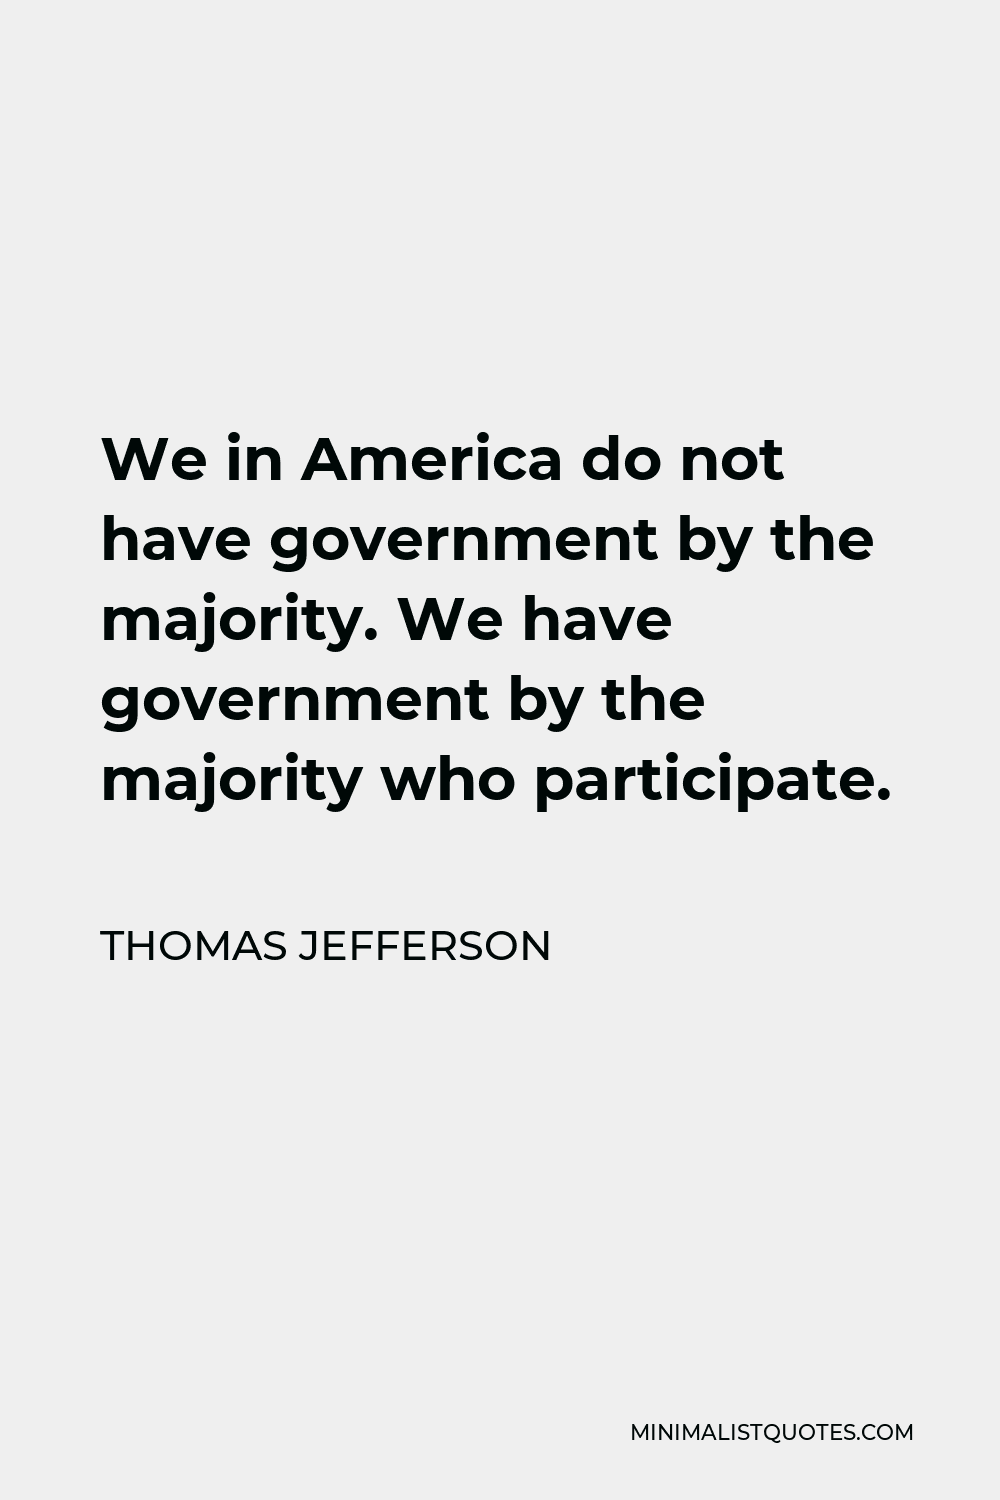 Thomas Jefferson Quote - We in America do not have government by the majority. We have government by the majority who participate.